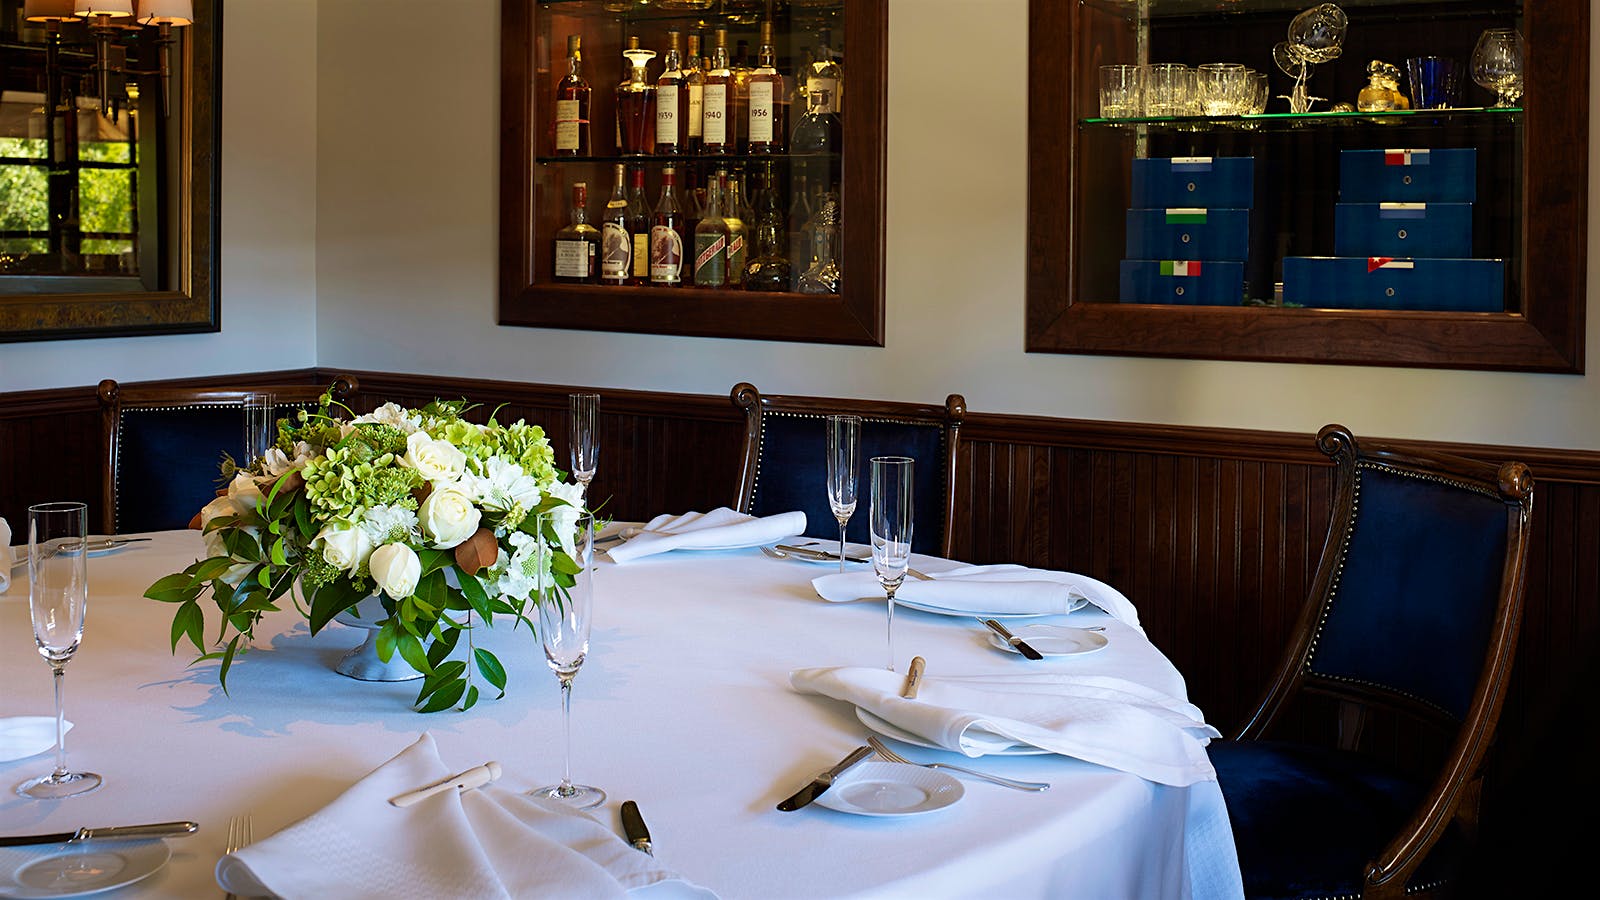 The French Laundry Launches Lavish Indoor-Dining Experience